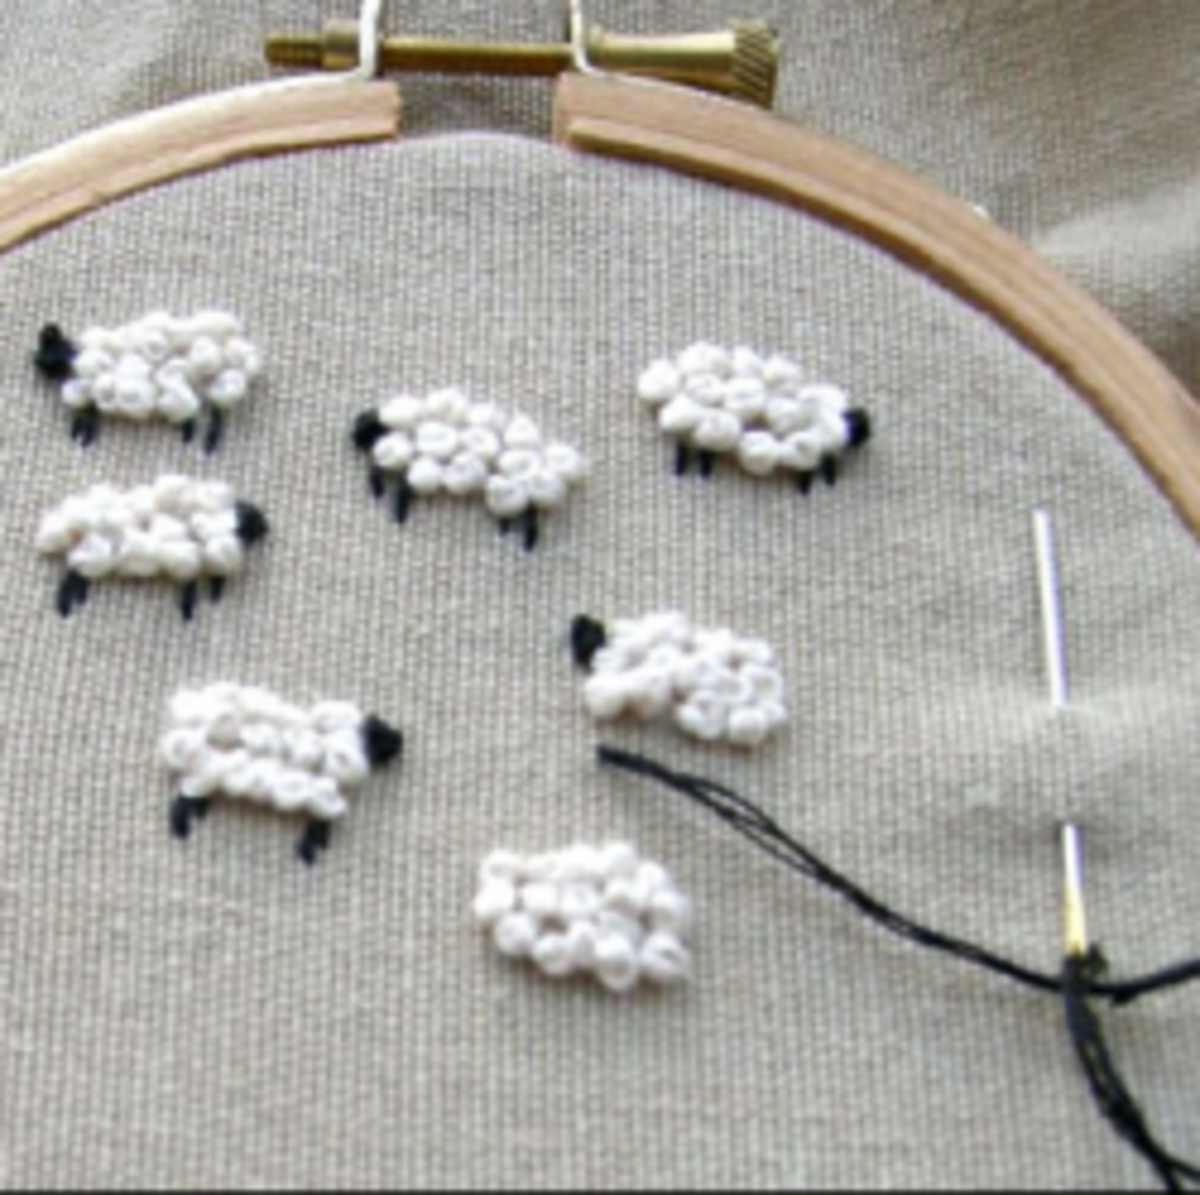 -embroidery-craft-tutorials-how-to-embroider-for-beginners-stitches-projects-